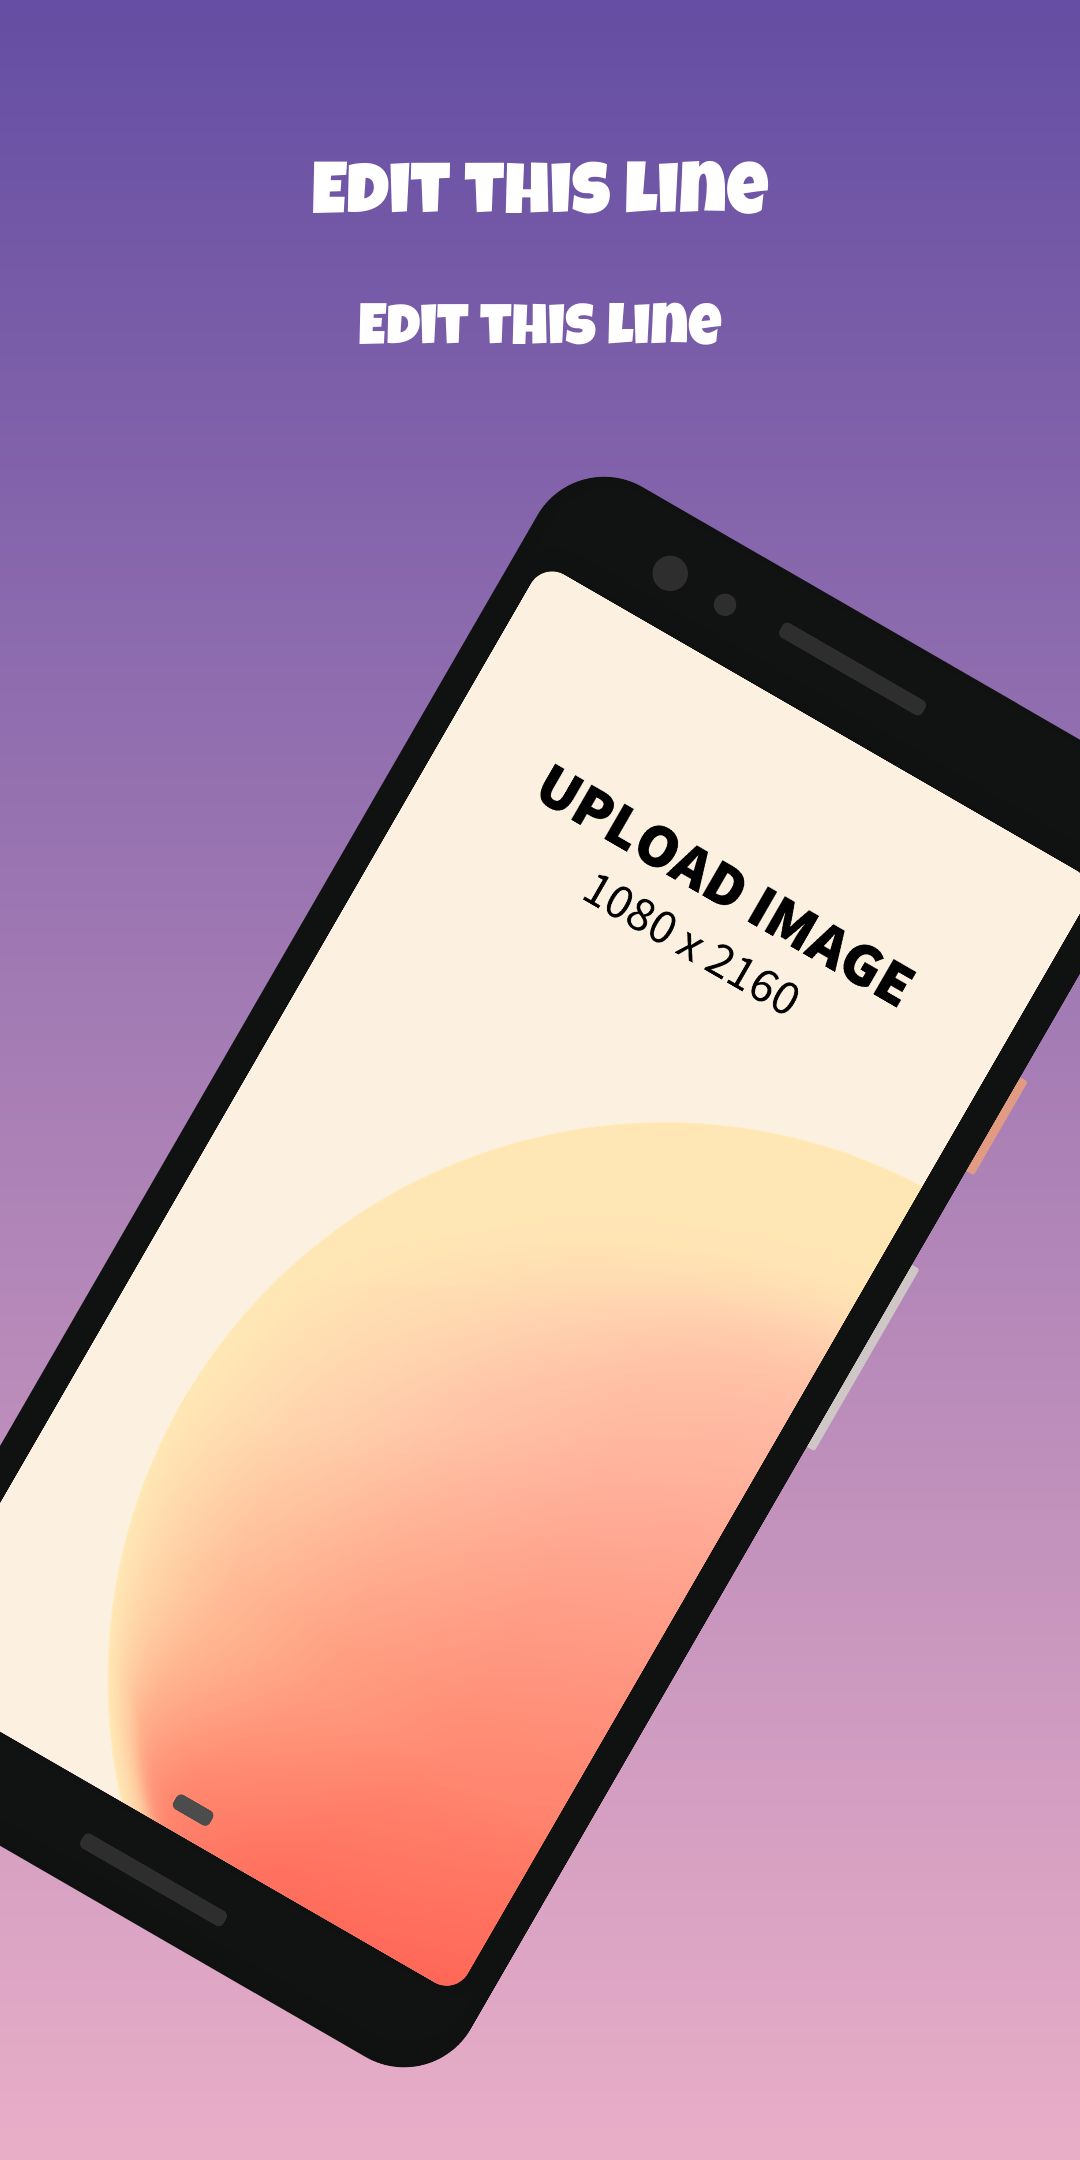 Google Pixel 3 Screenshot 4 template. Quickly edit fonts, text, colors, and more for free.